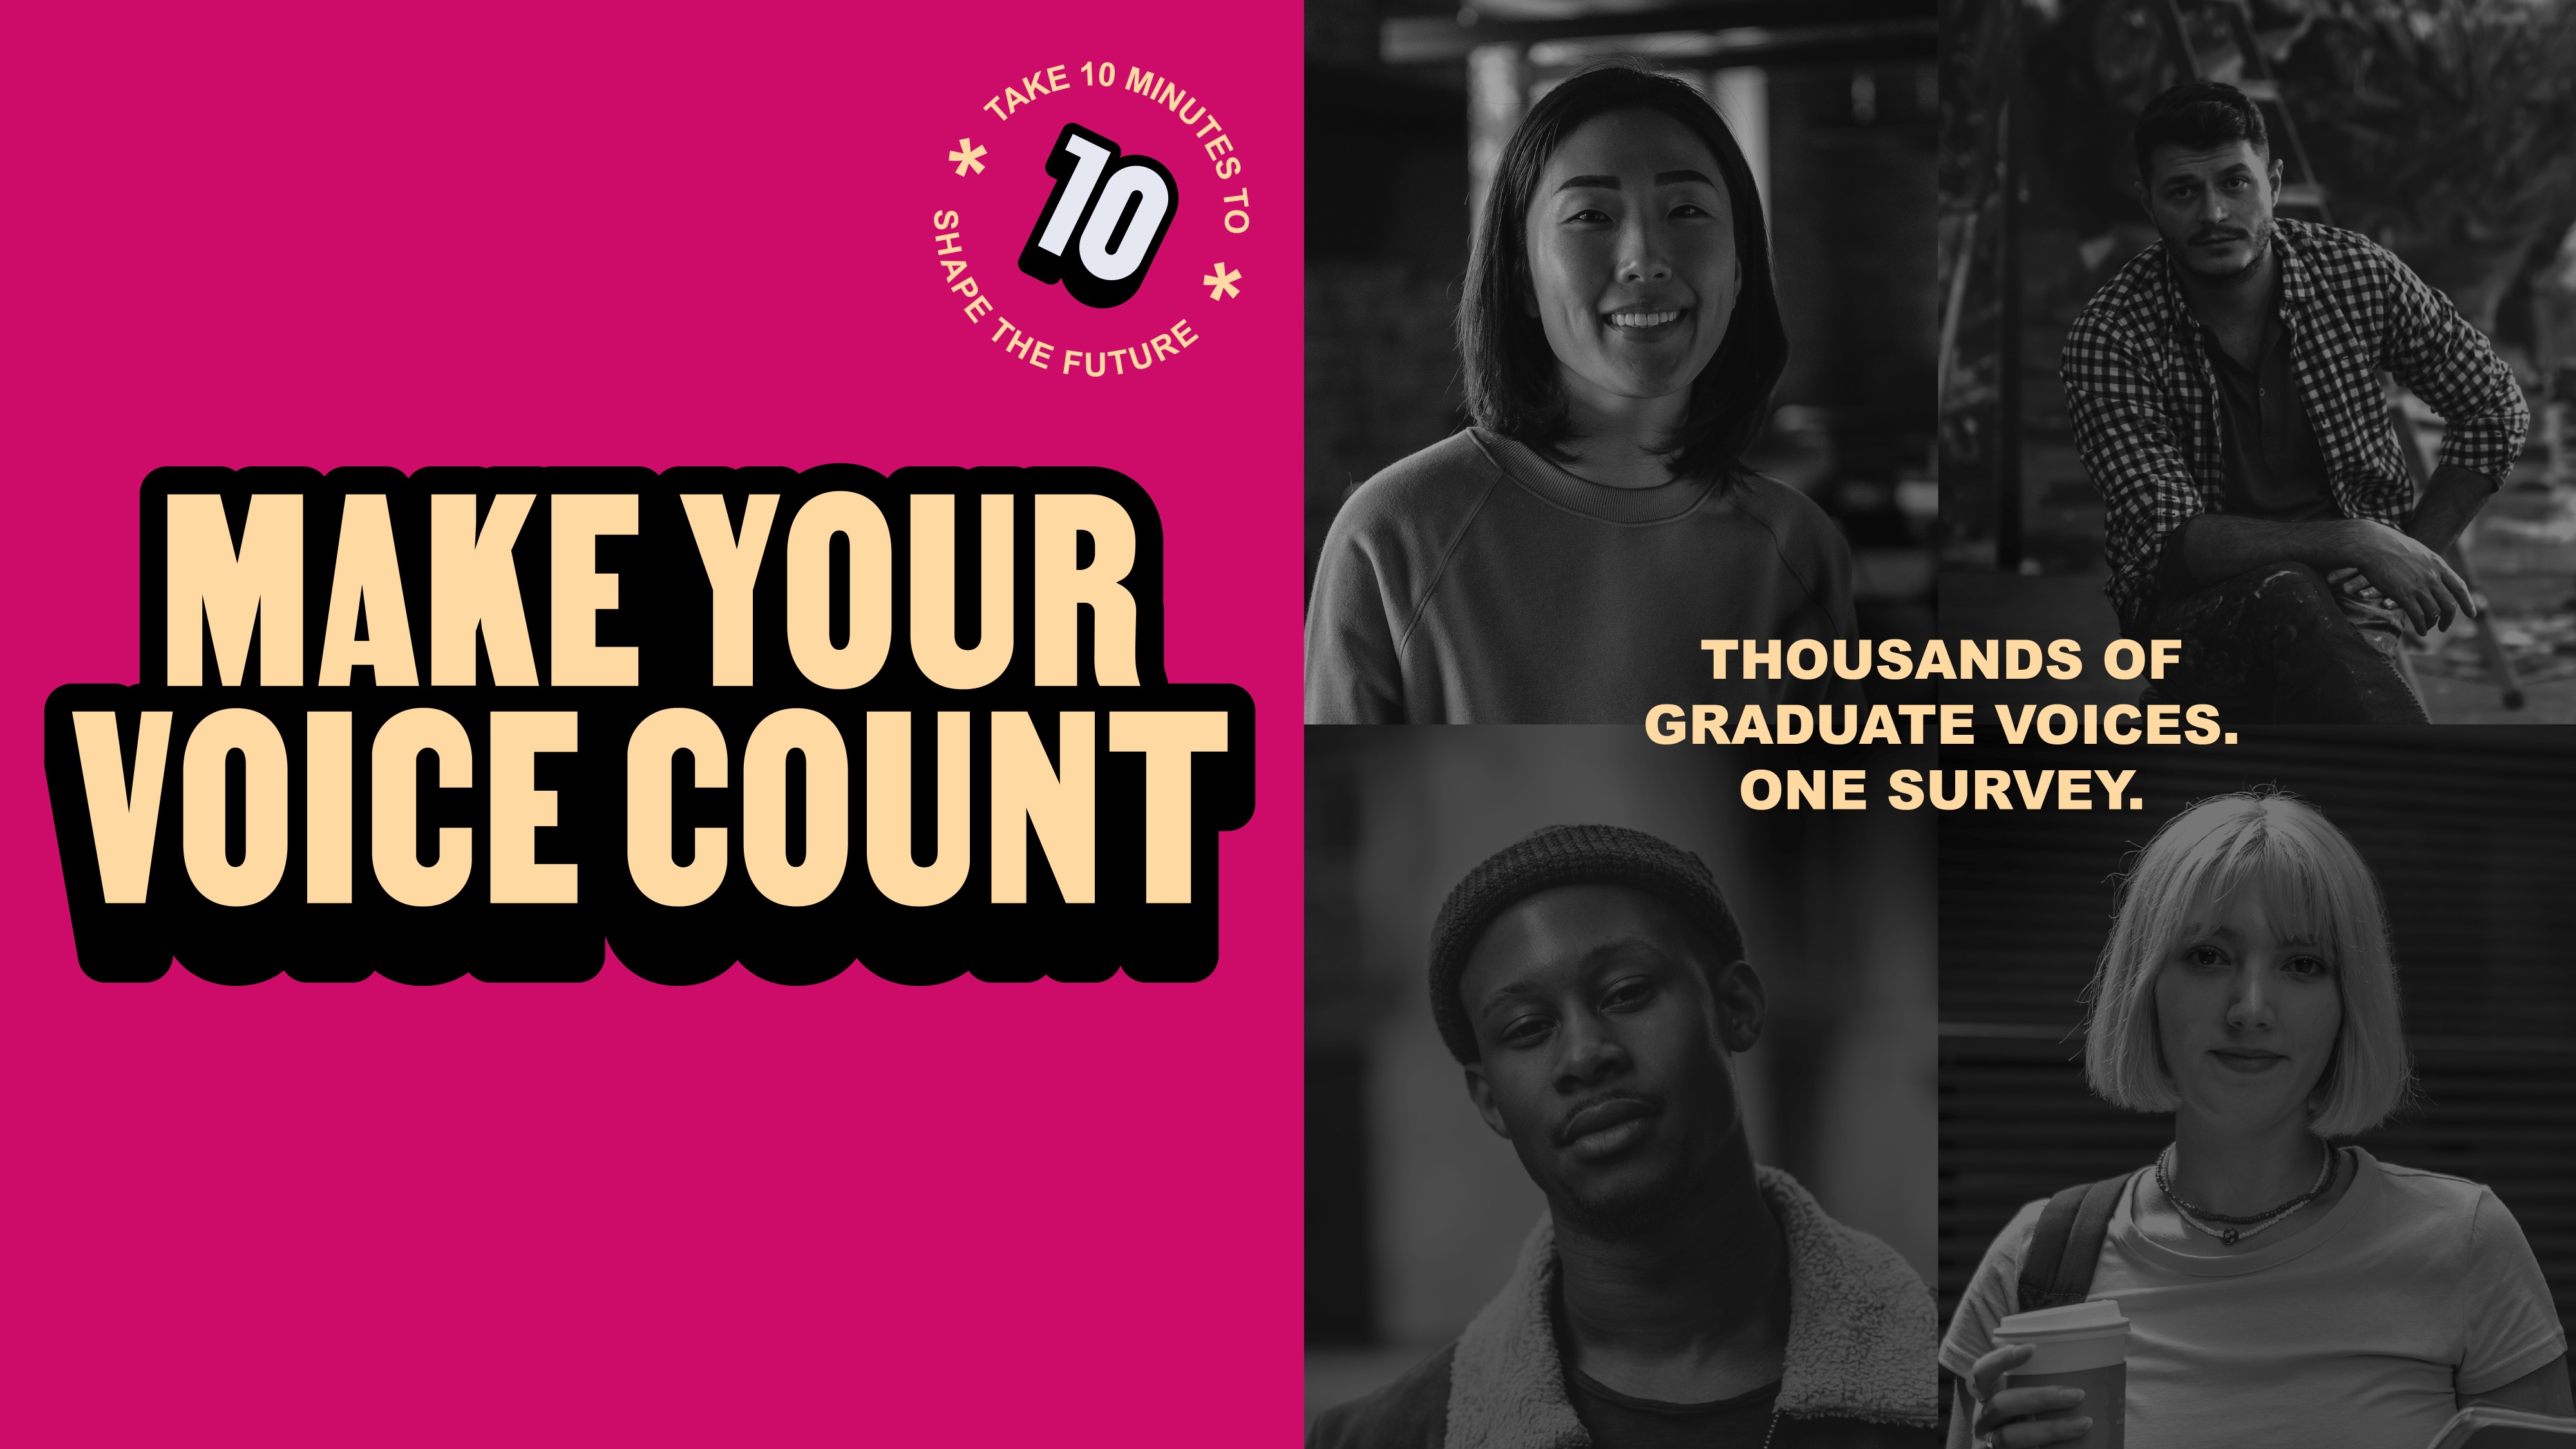 Make your voice count. Take 10 minutes to shape the future. Thousands of graduate voices. One survey.